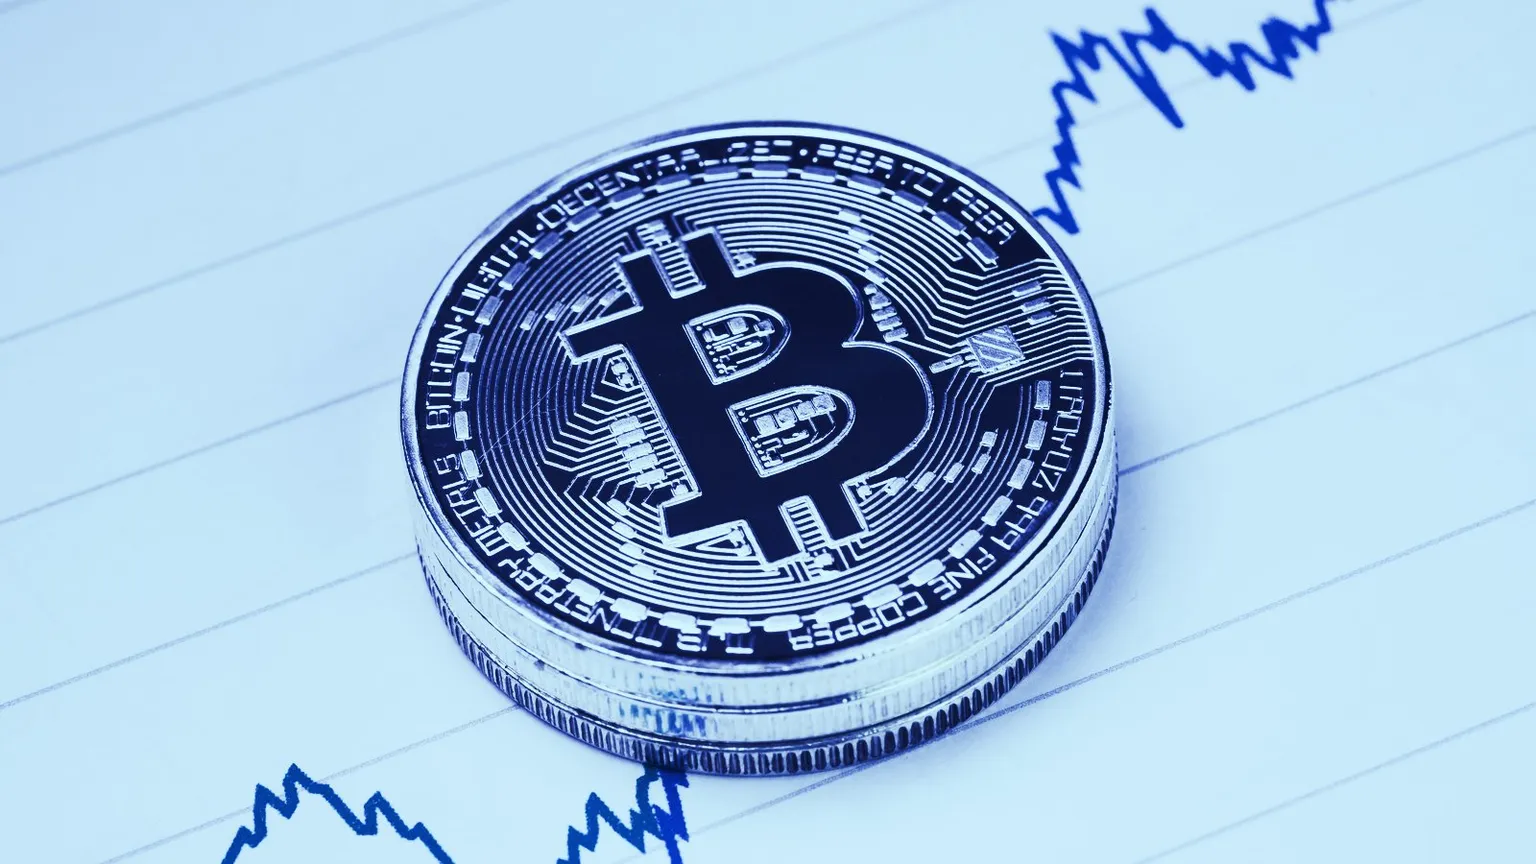 Bitcoin is the largest crypto asset by market cap. Image: Shutterstock.